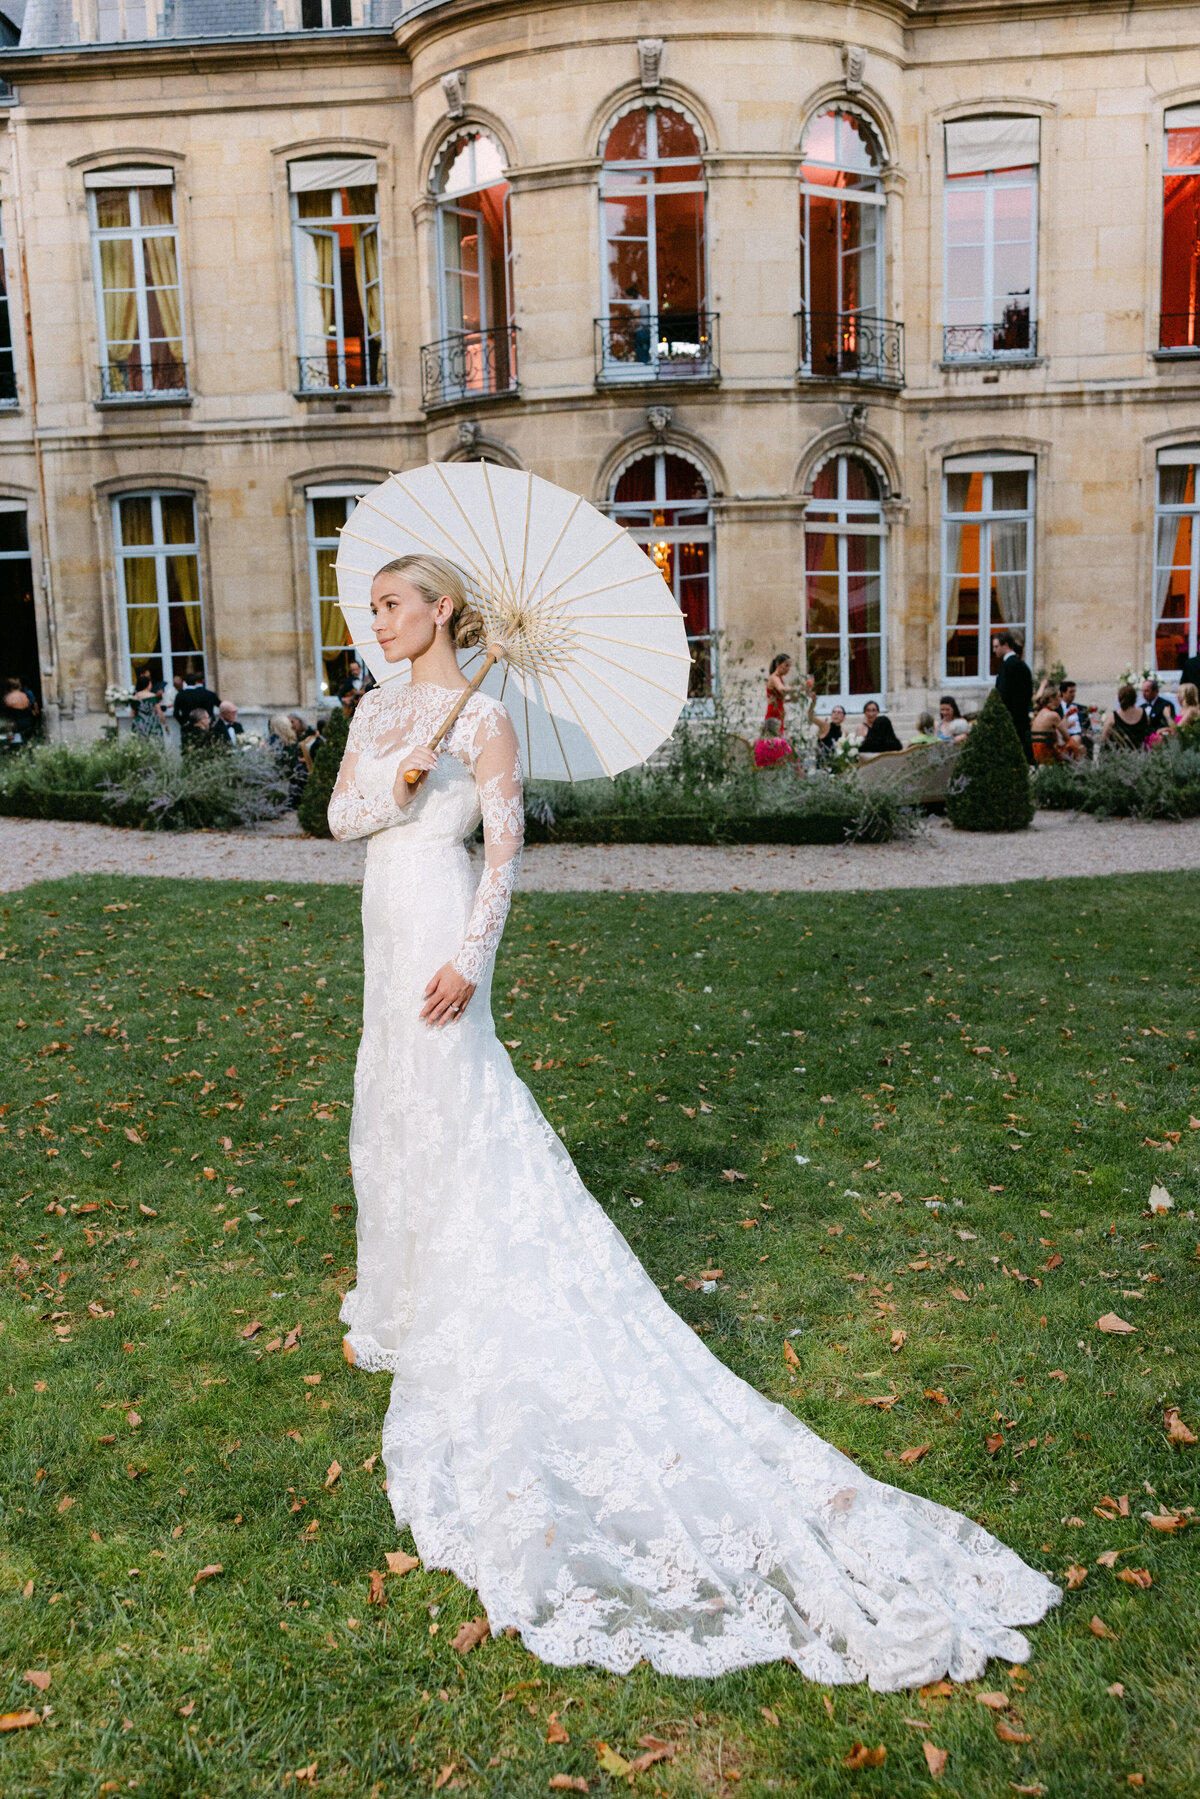 Jennifer Fox Weddings English speaking wedding planning & design agency in France crafting refined and bespoke weddings and celebrations Provence, Paris and destination wd707